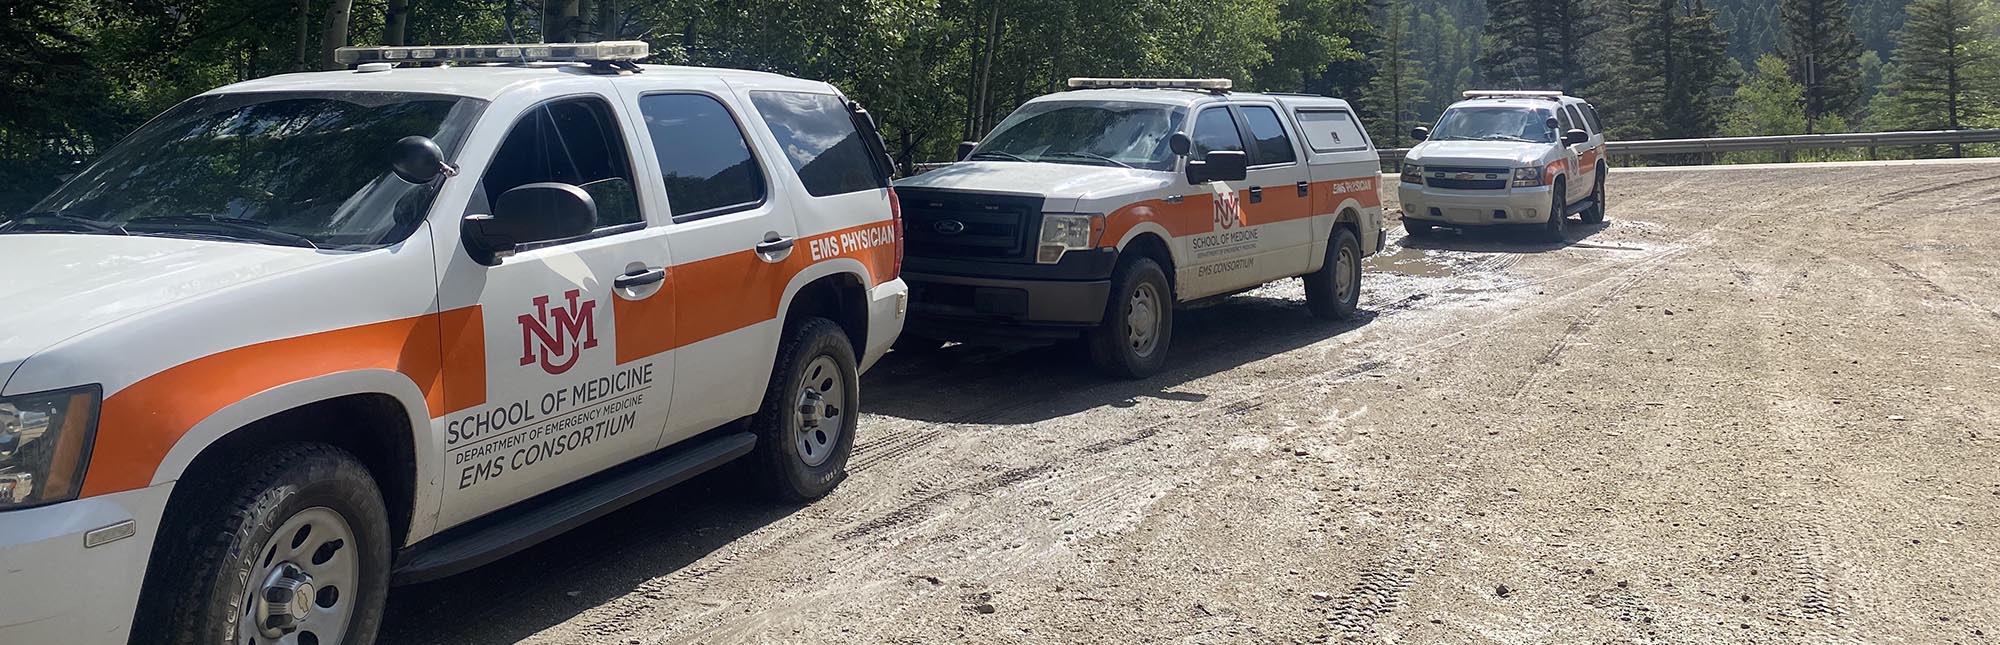 UNM EMS vehicles in the mountains